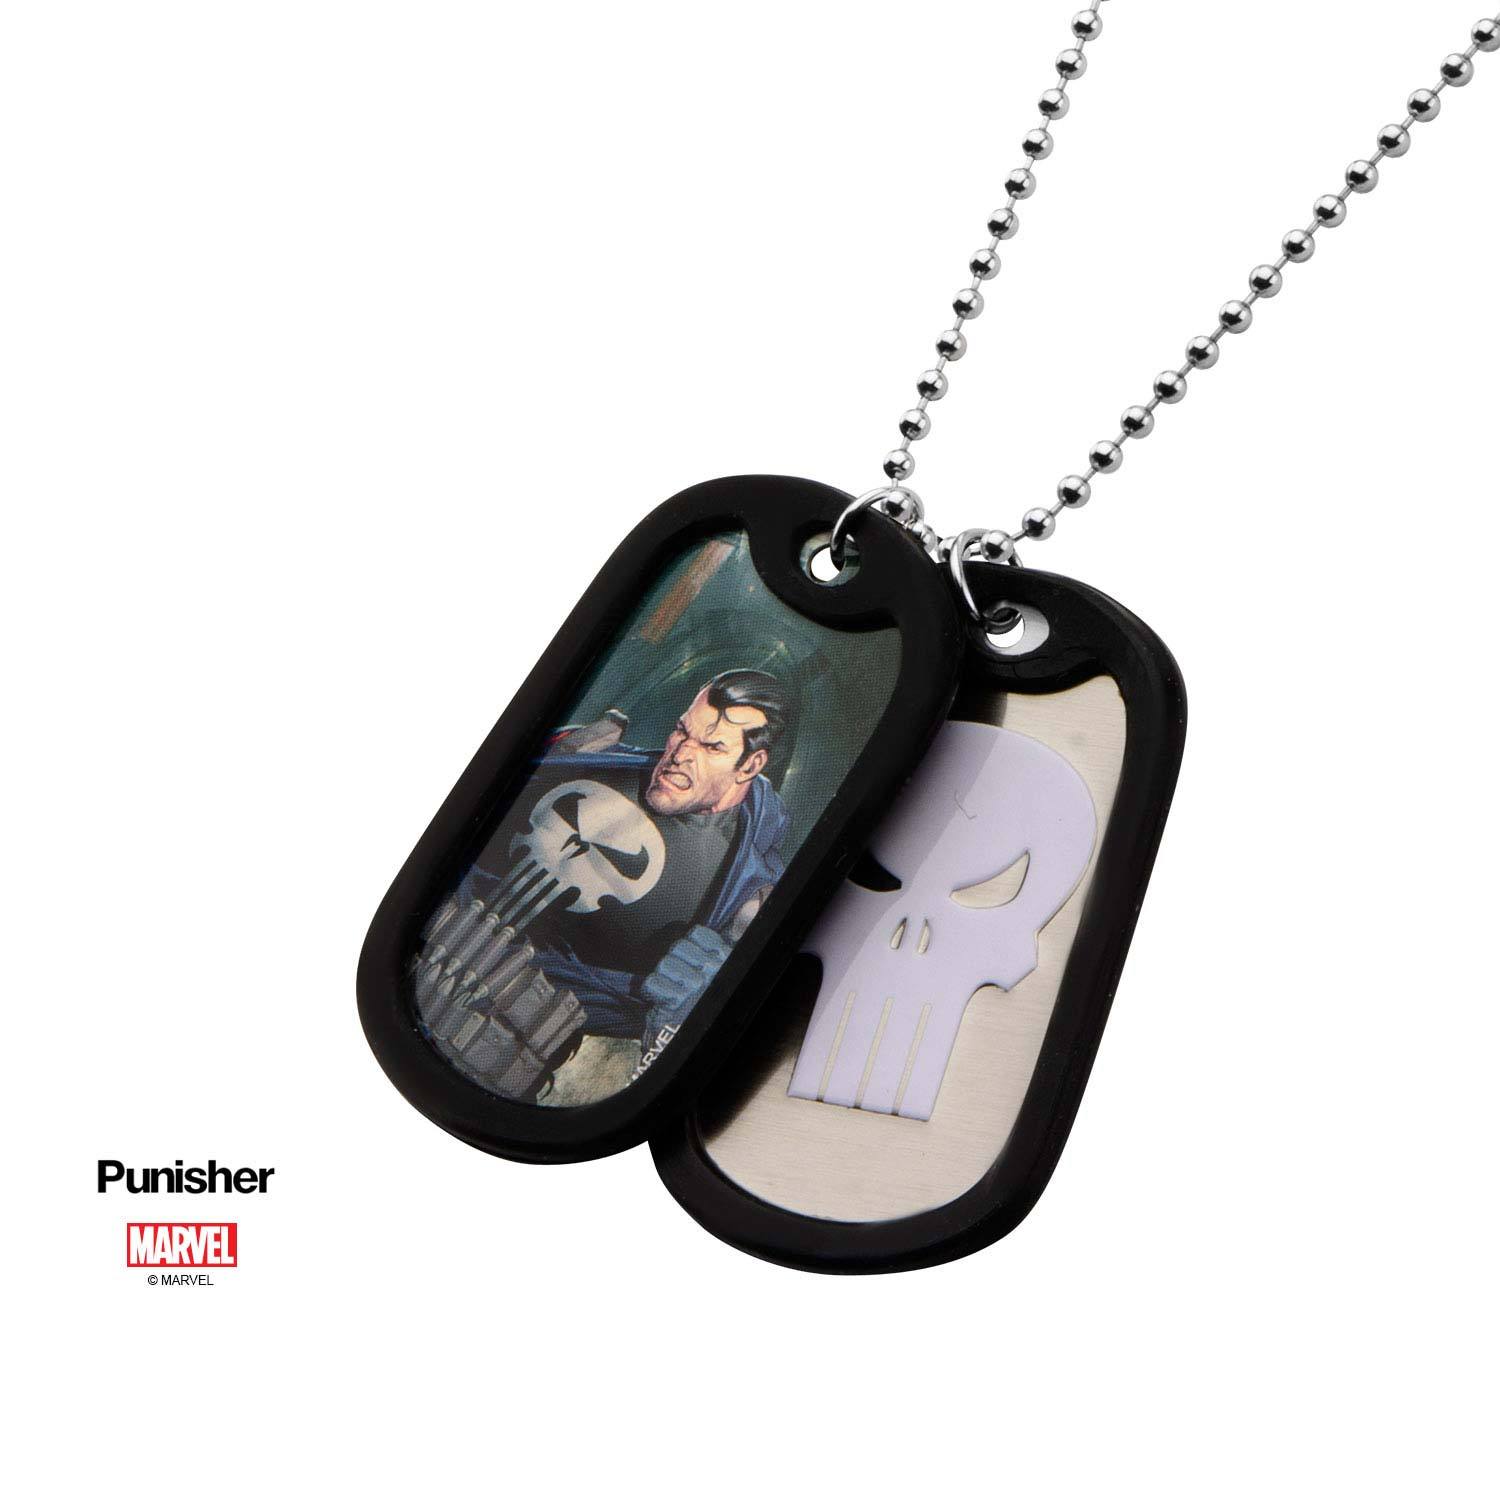 Marvel Punisher Graphic Logo Front with Rubber Silencer Dog Tag Pendant Necklace [NOT AVAILABLE]